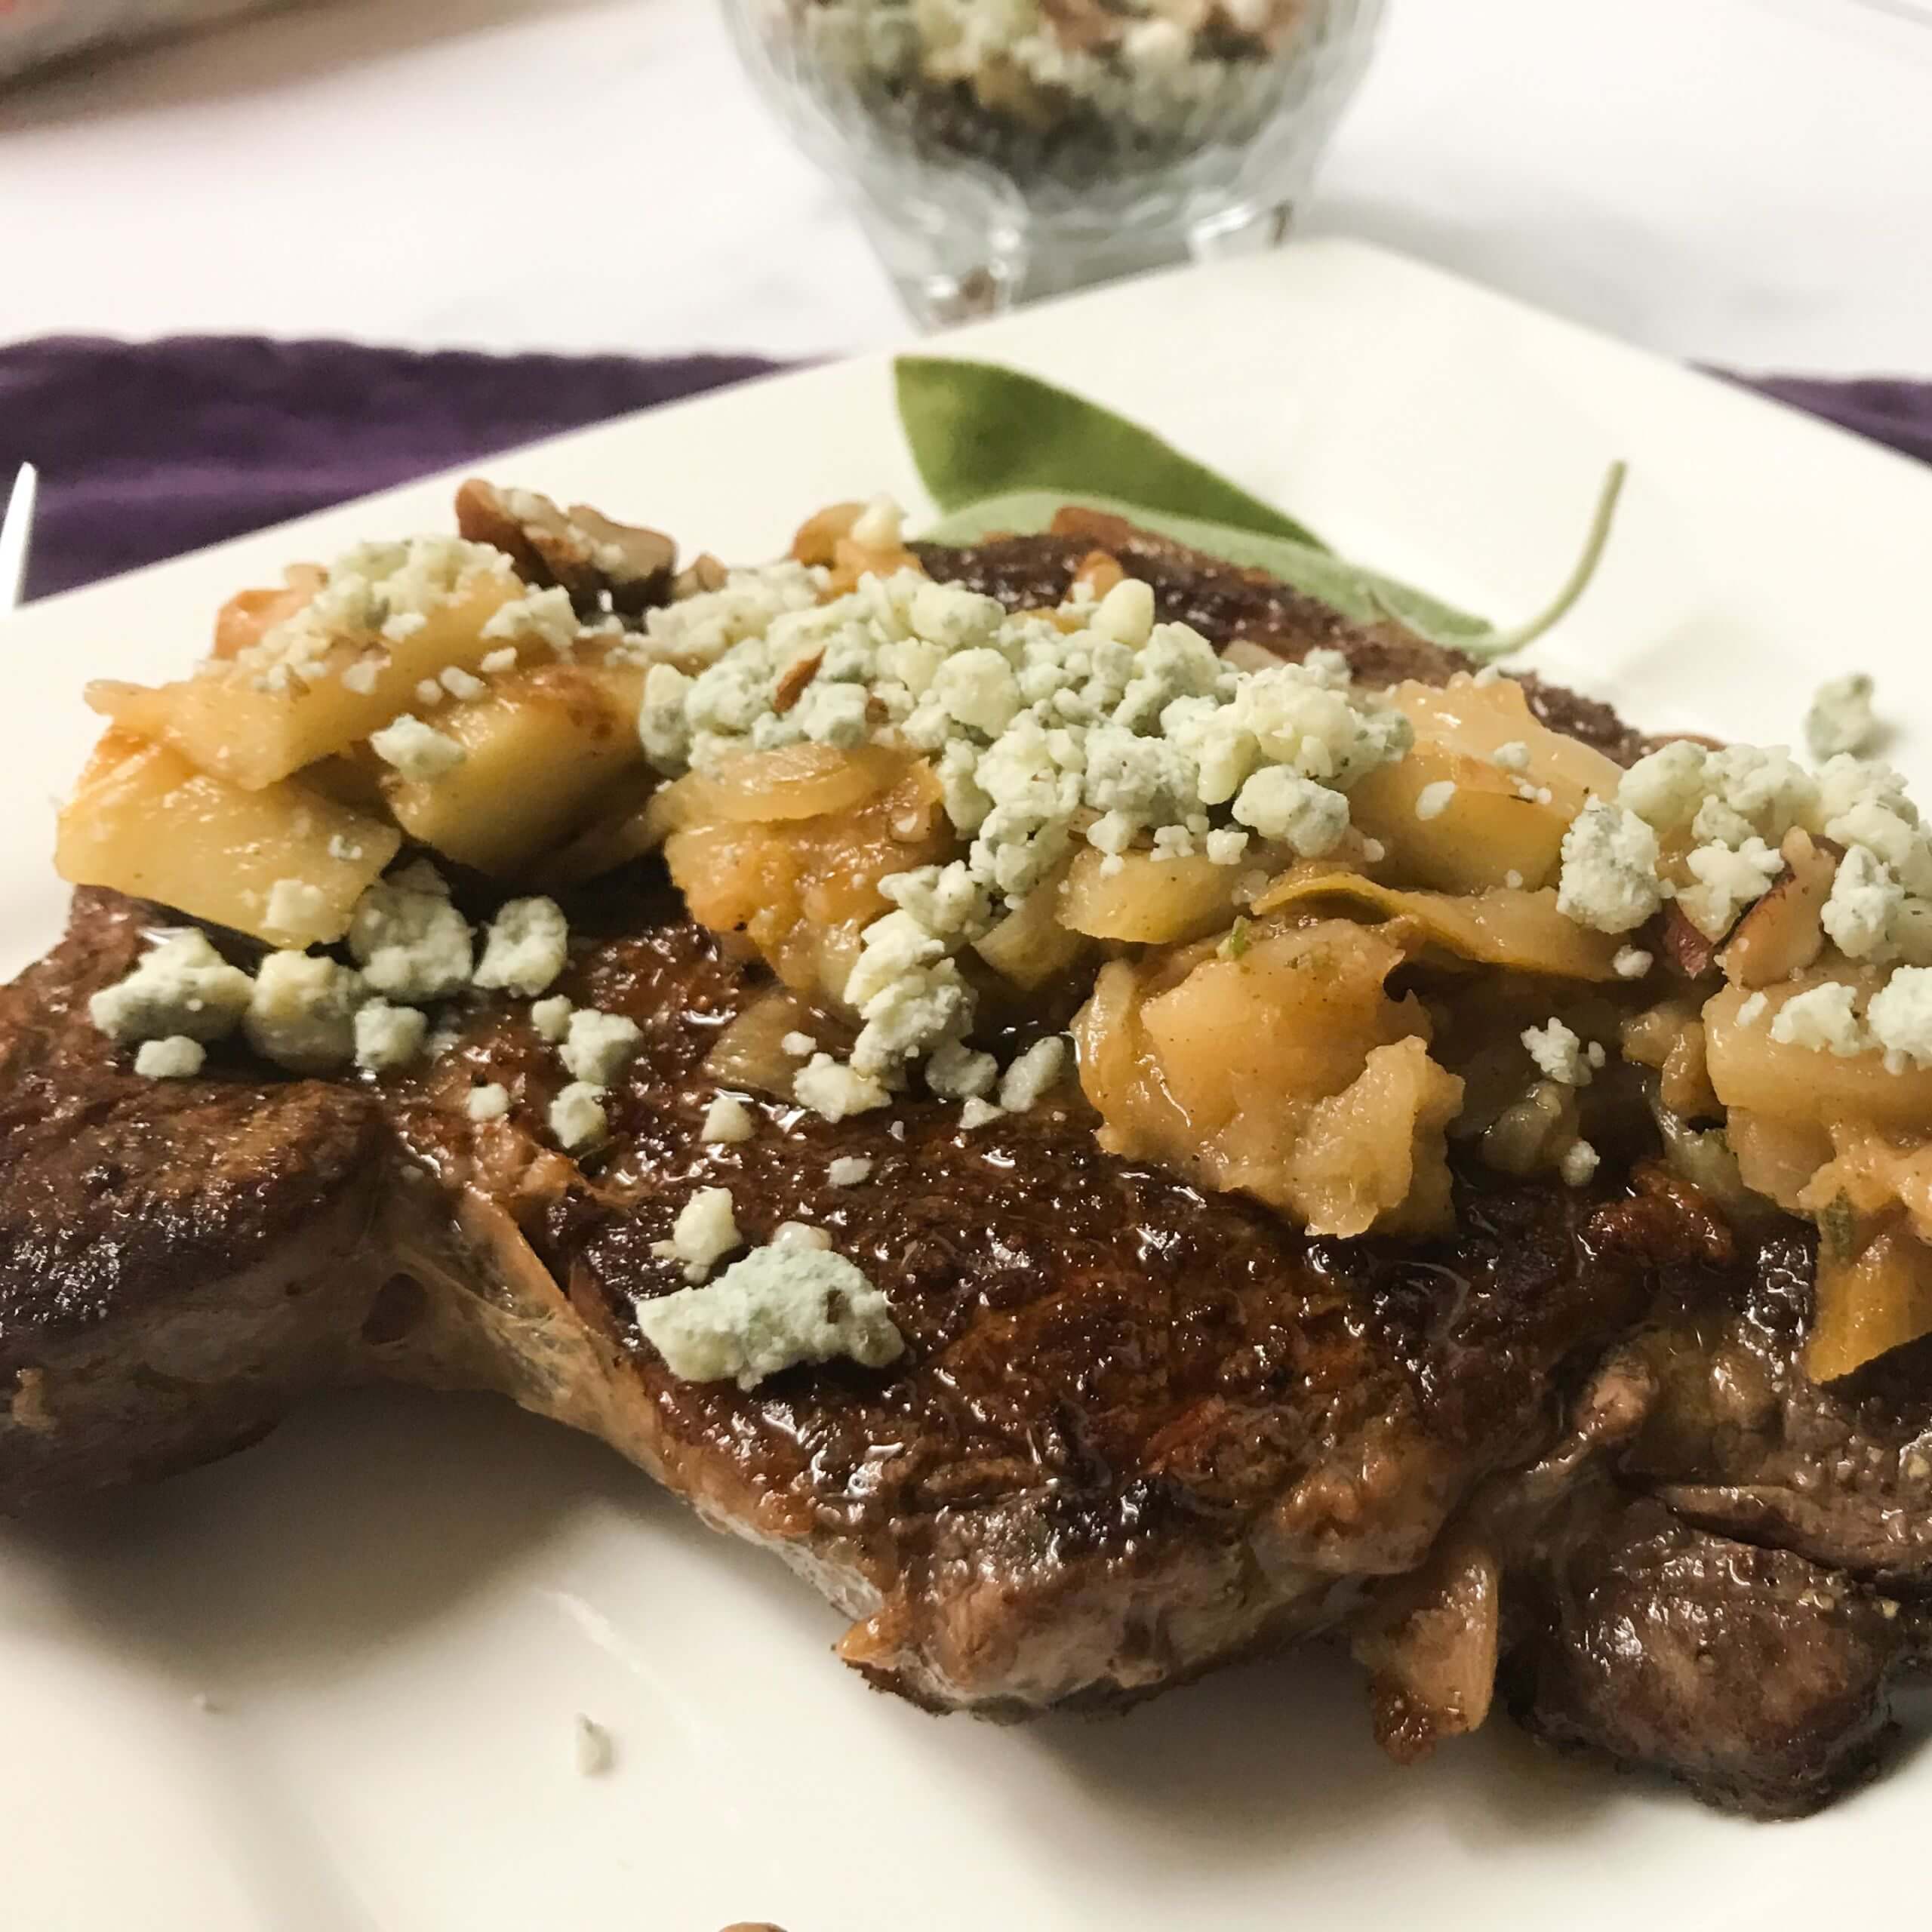 RIBEYE STEAK WITH FRUIT & BLUE CHEESE CRUMBLE | My Curated Tastes